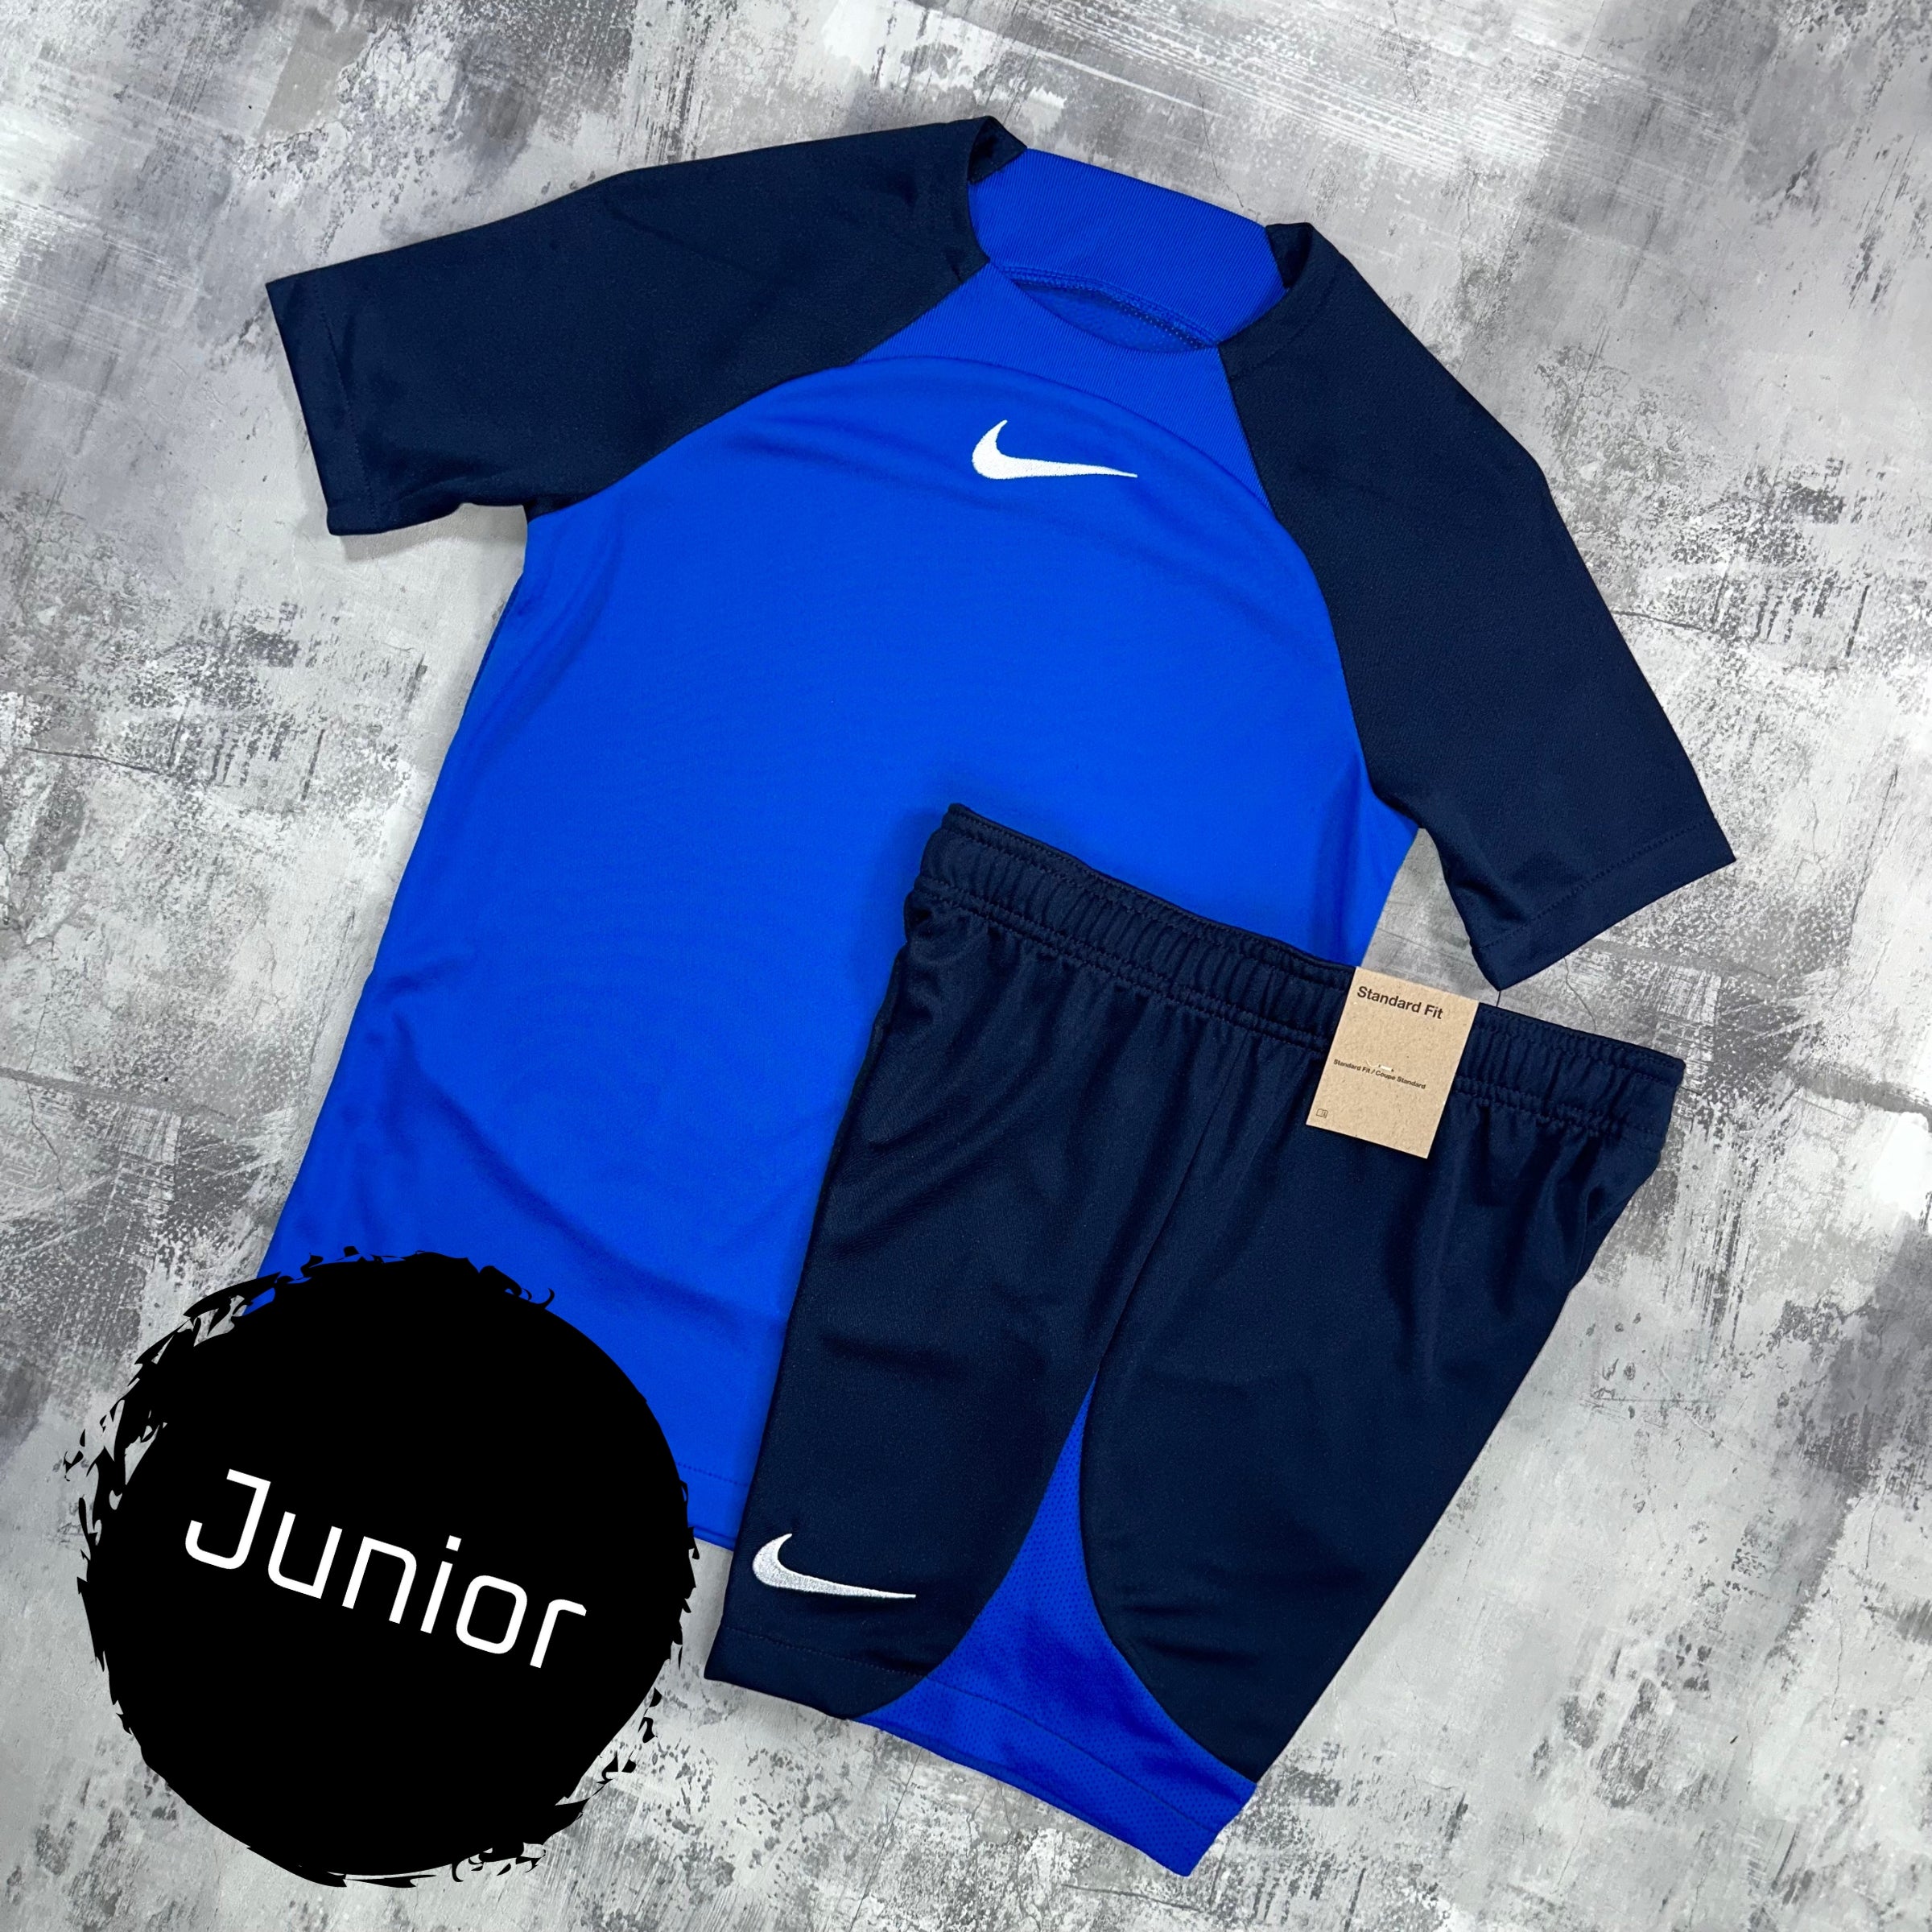 Nike Junior Dri-Fit Academy T-Shirt in Blue, featuring crew neck design and Nike Swoosh logo